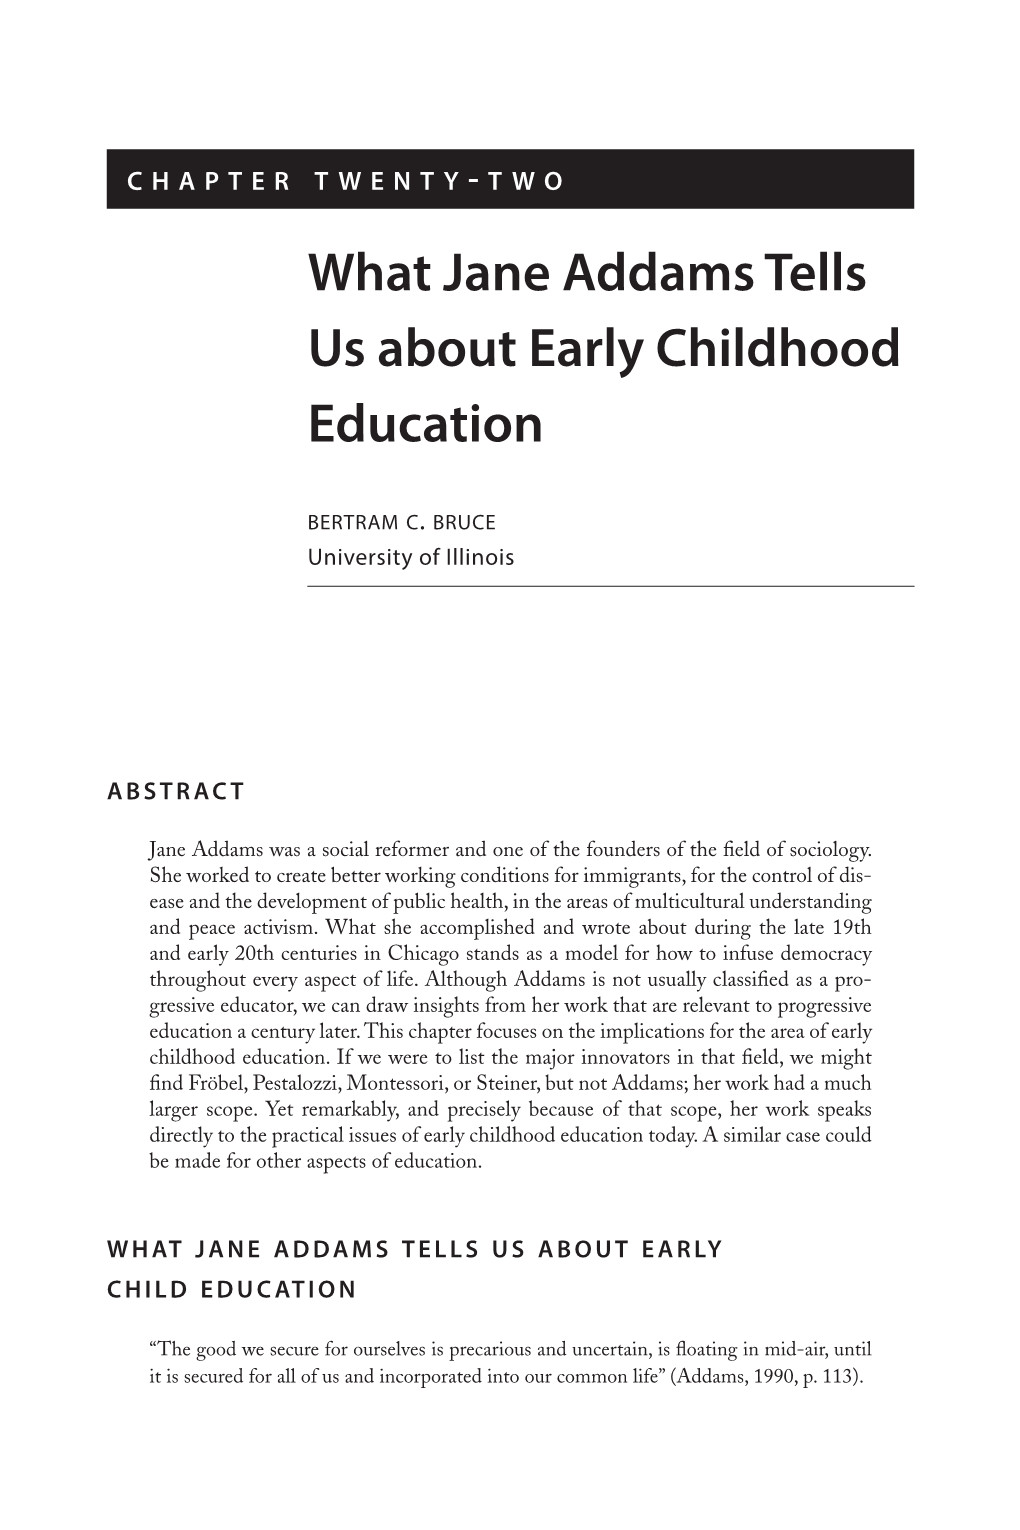 What Jane Addams Tells Us About Early Childhood Education